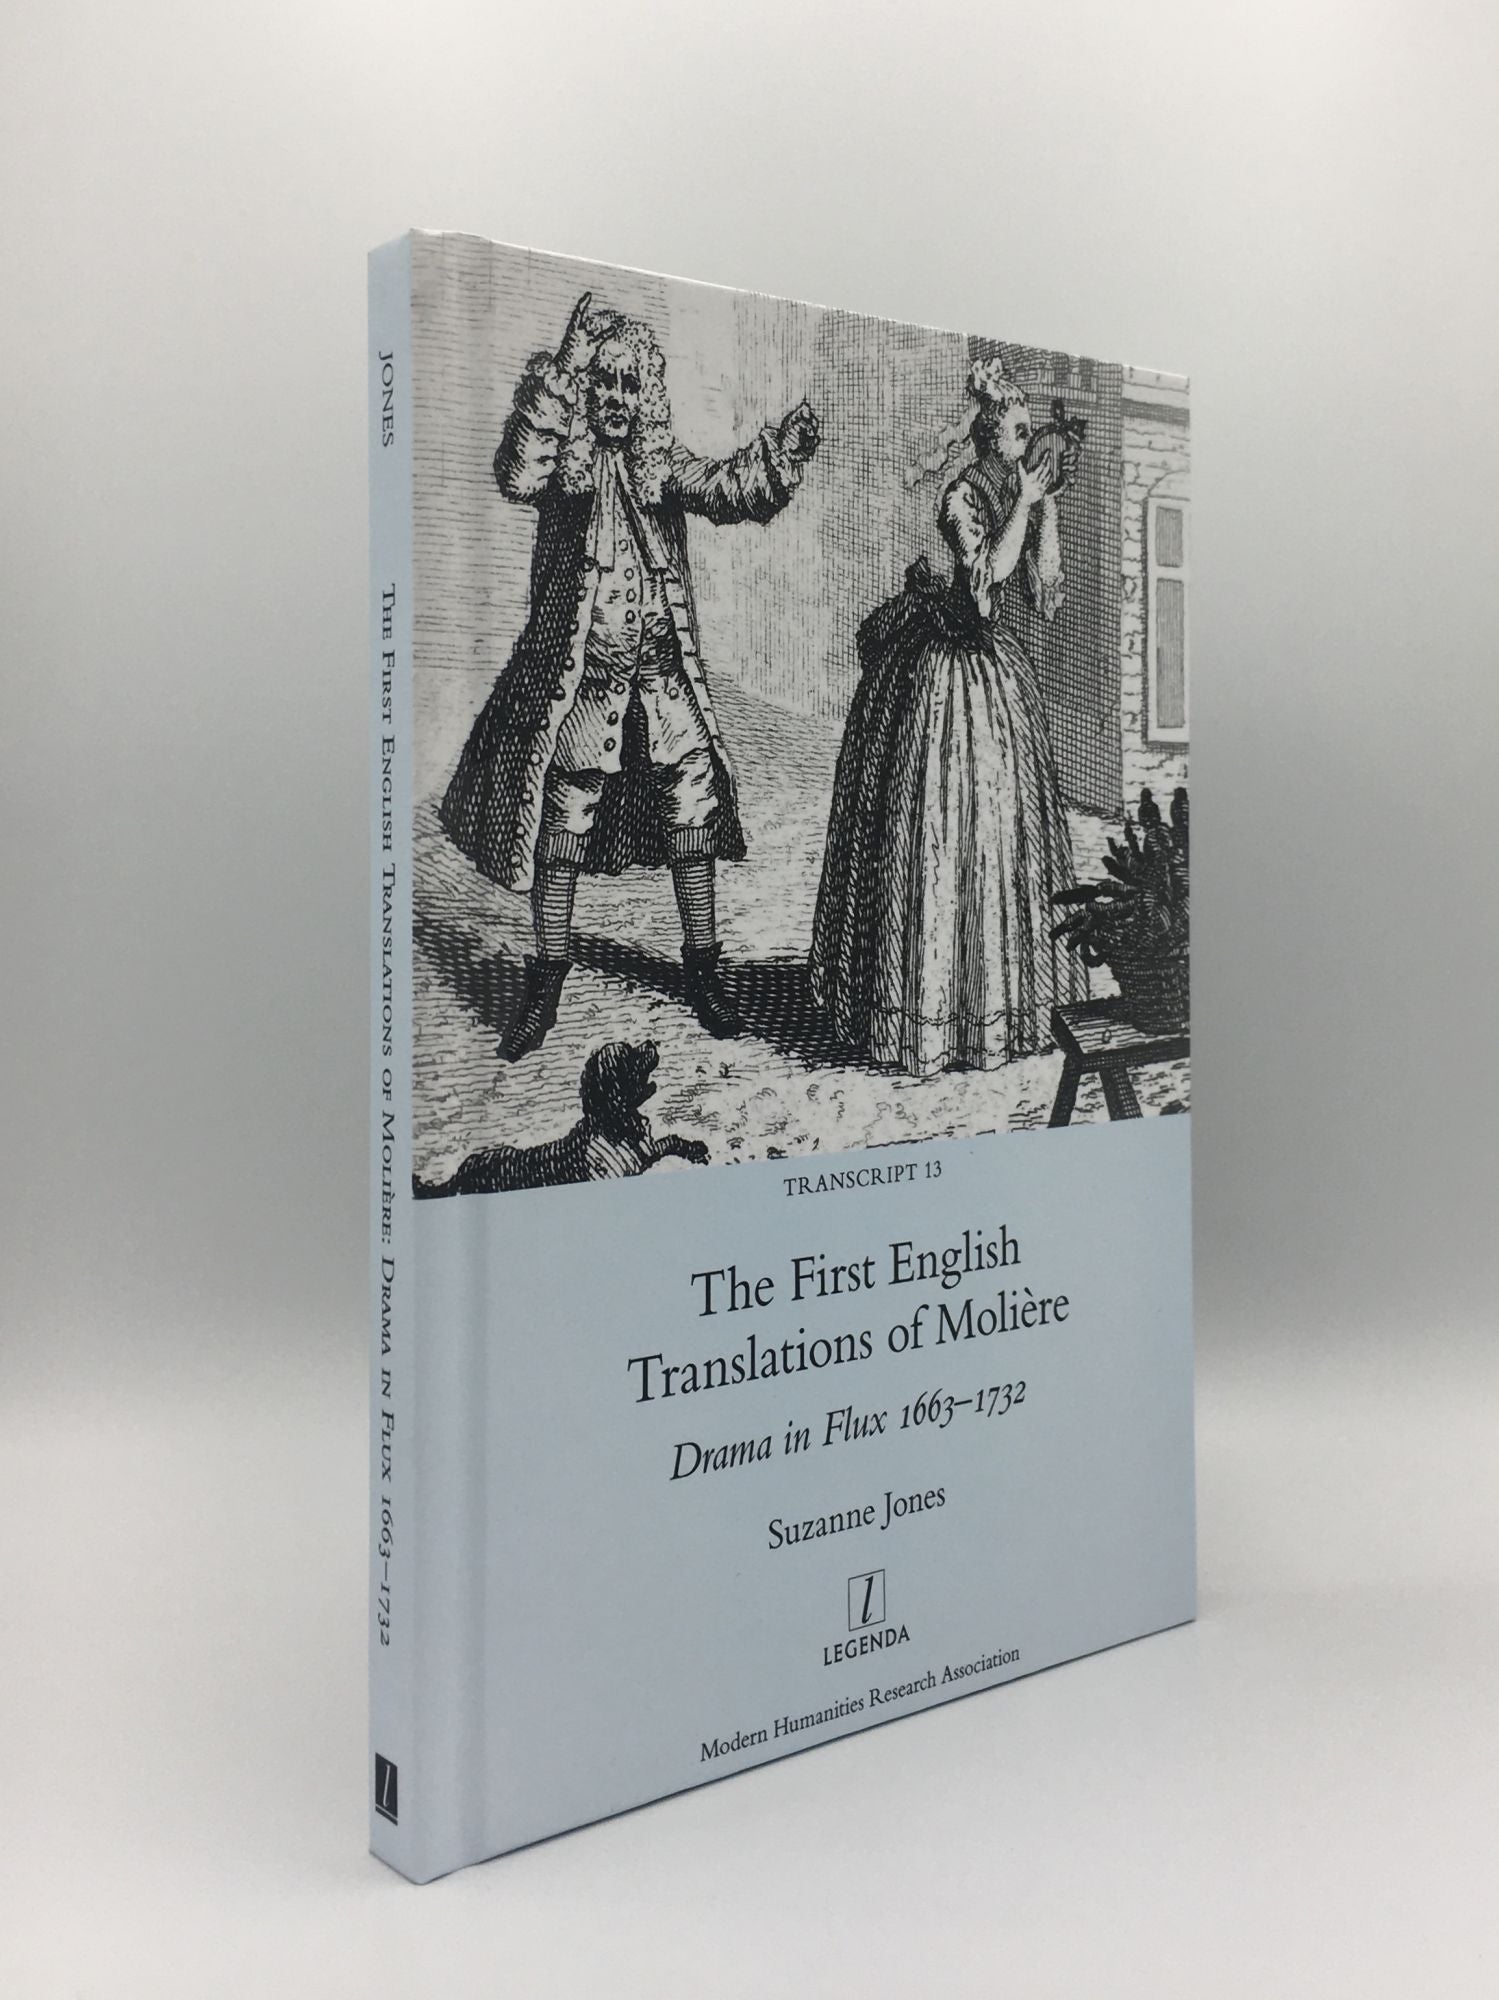 JONES Suzanne - The First English Translations of Moliere Drama in Flux 1663-1732